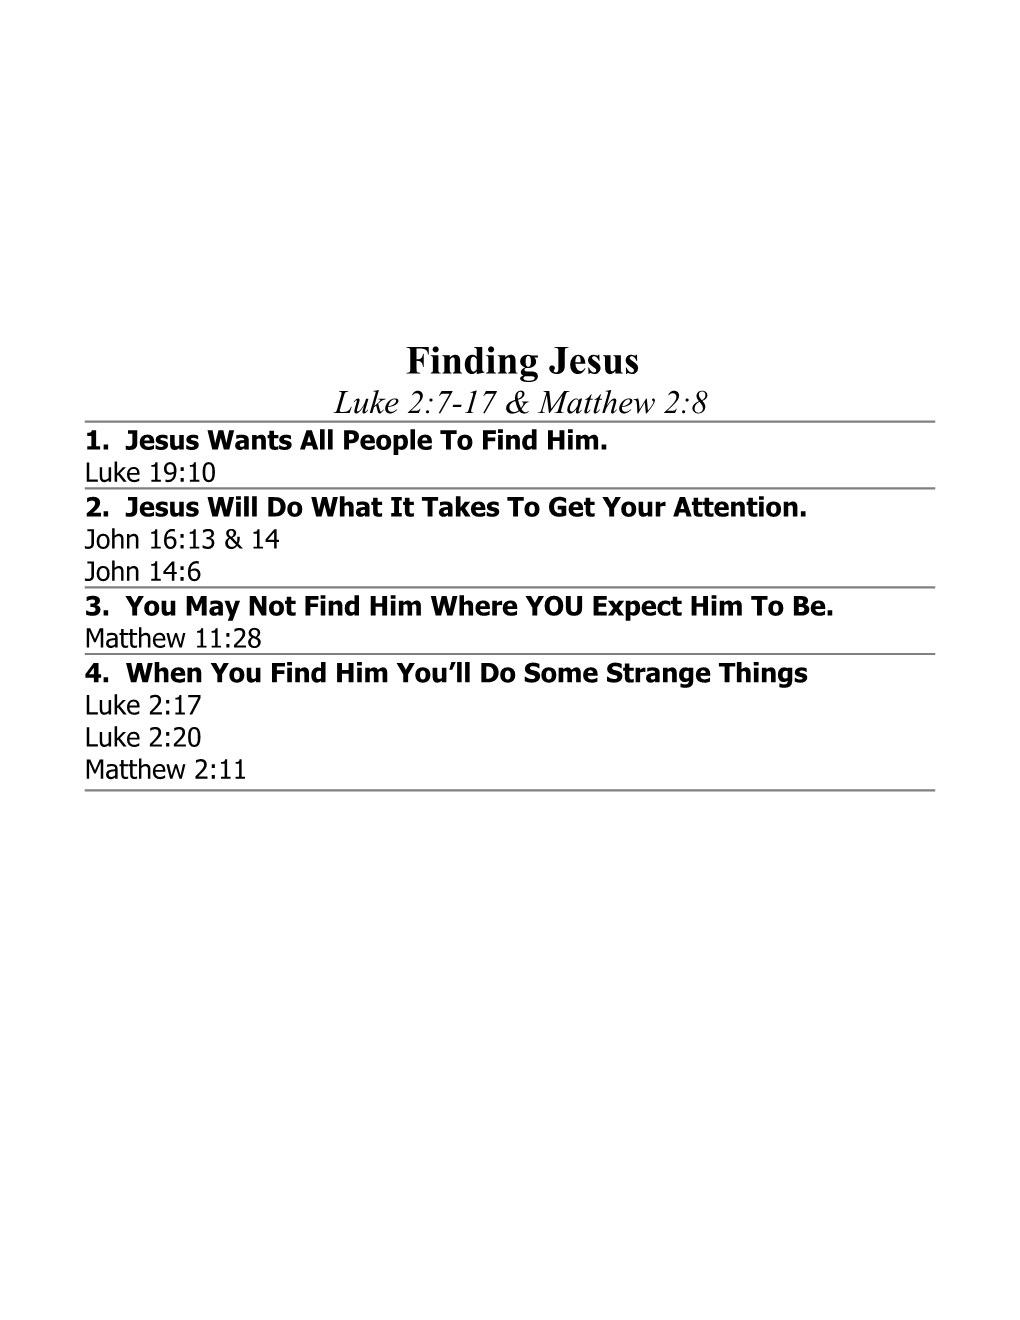 2. Jesus Will Do What It Takes to Get Your Attention